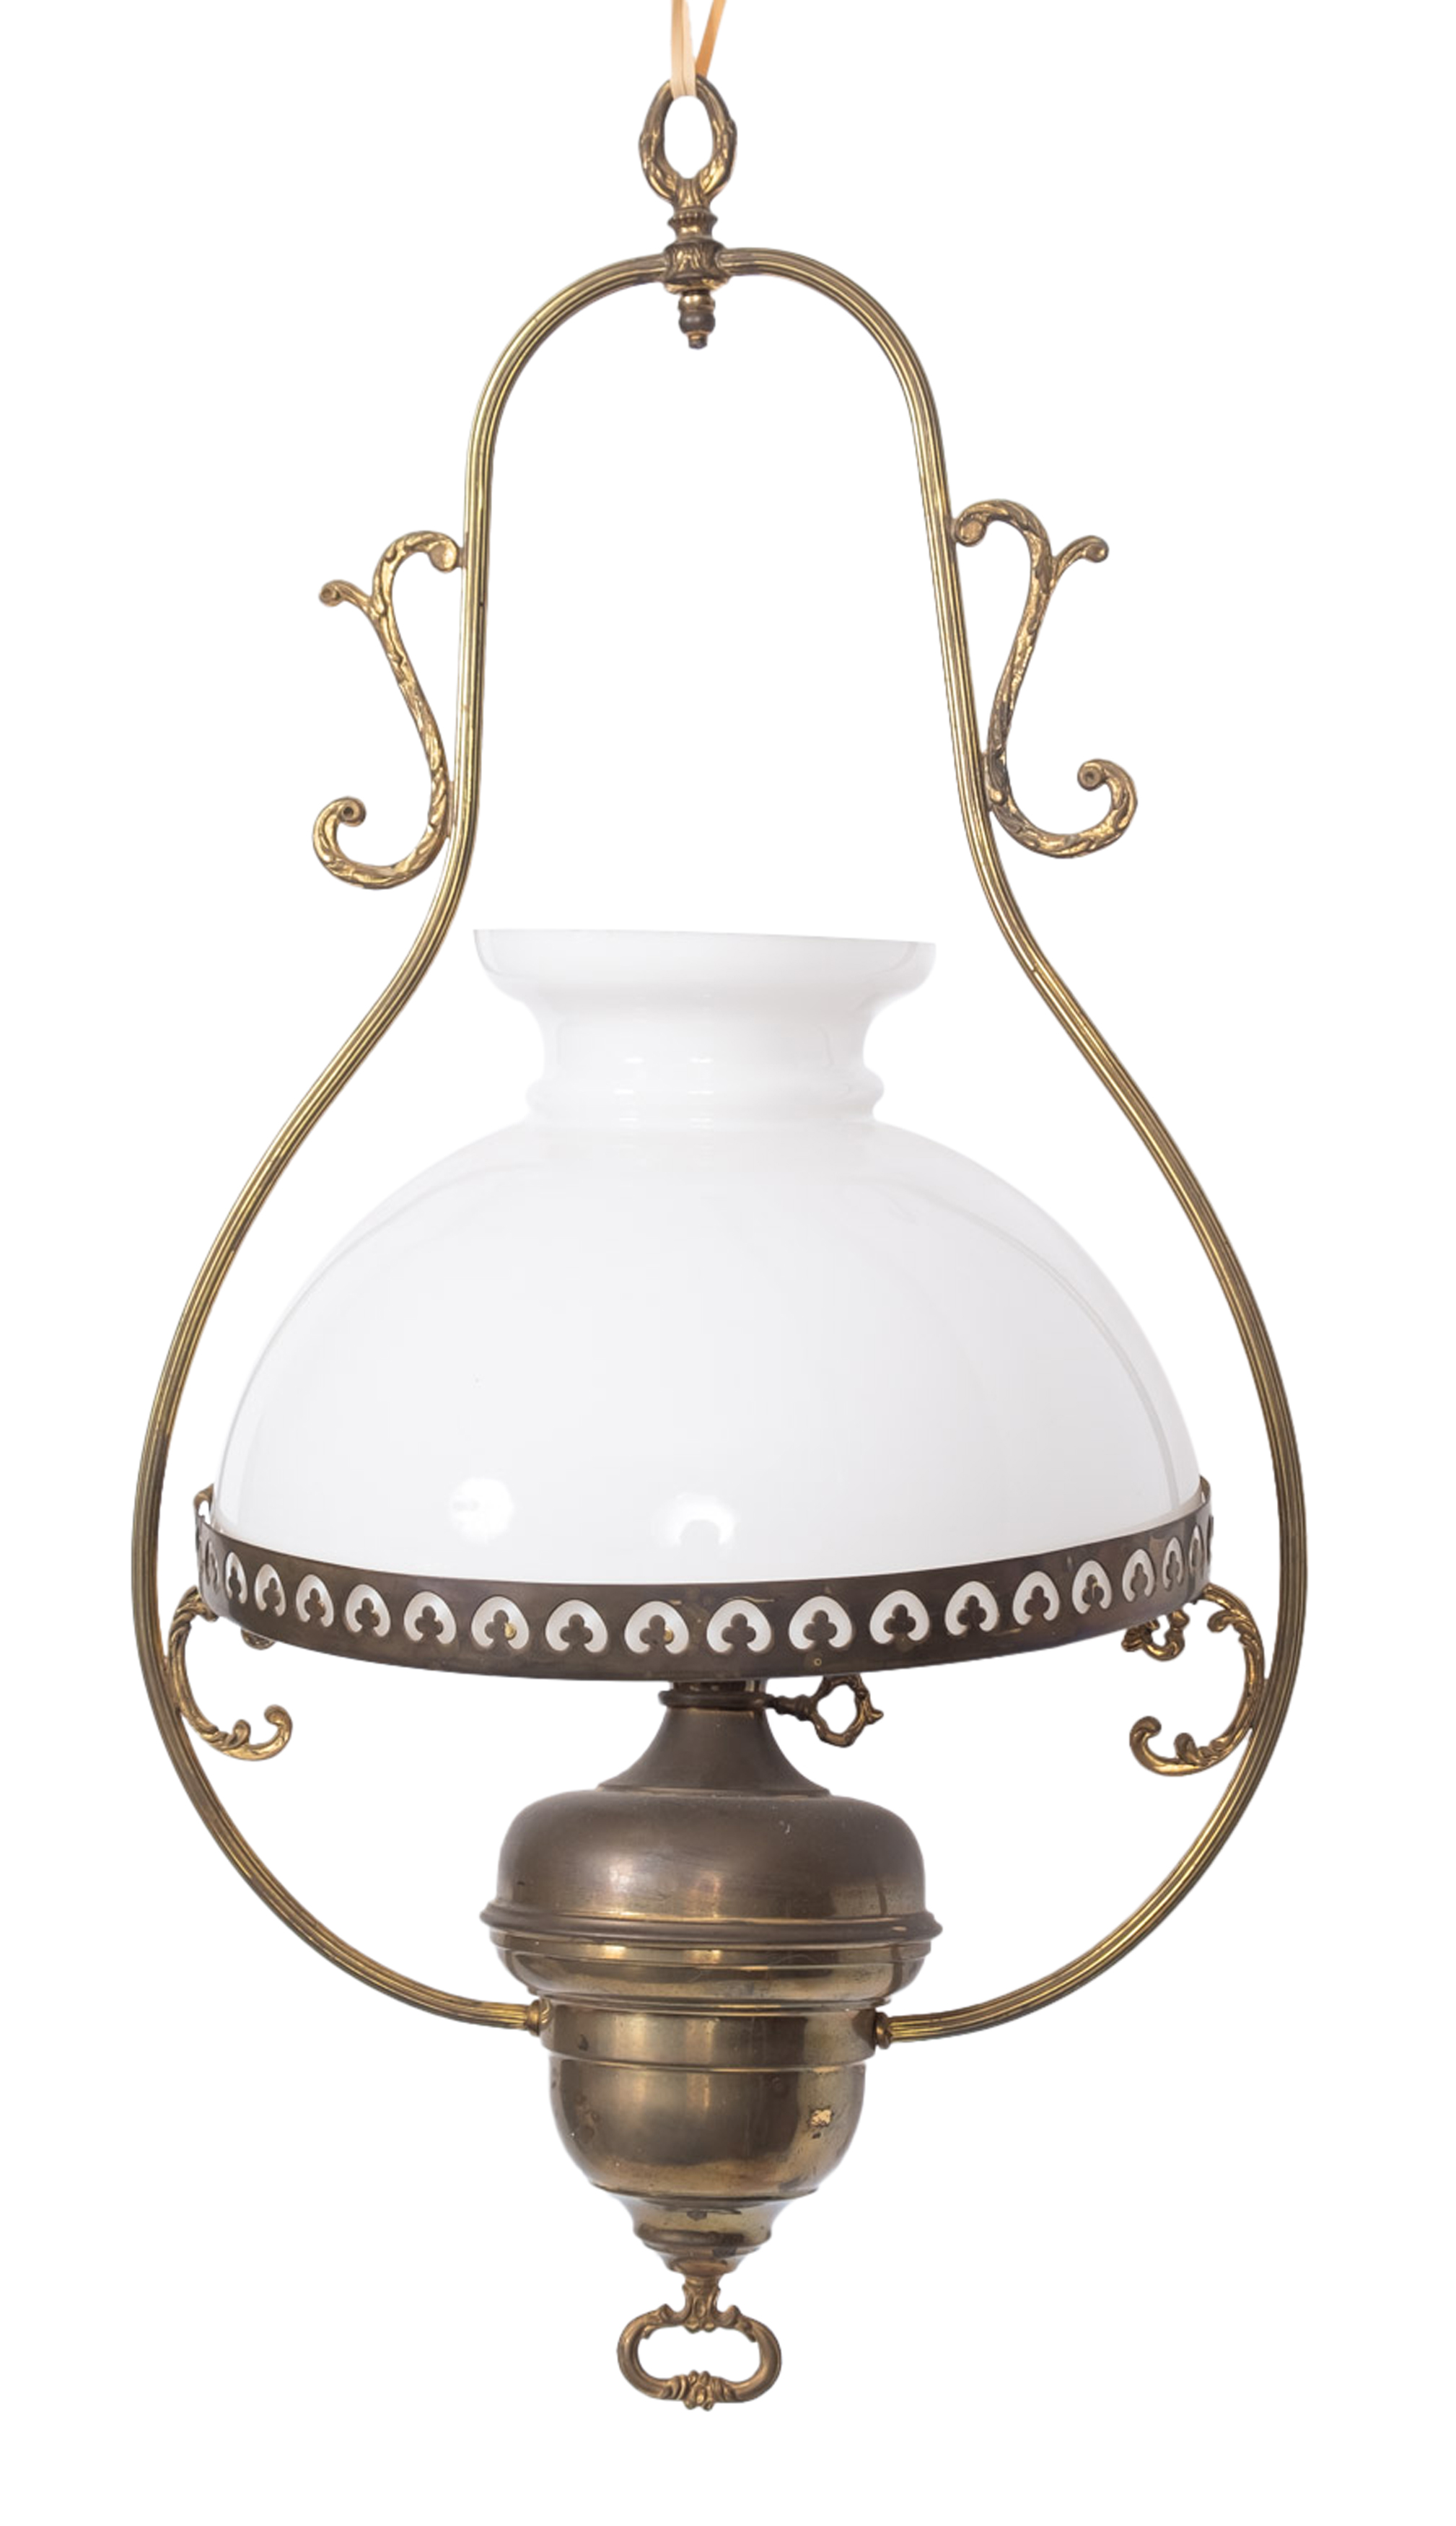 Three late Victorian/ Edwardian brass circular hanging oil lamps, with white opaque glass shades, - Image 2 of 3